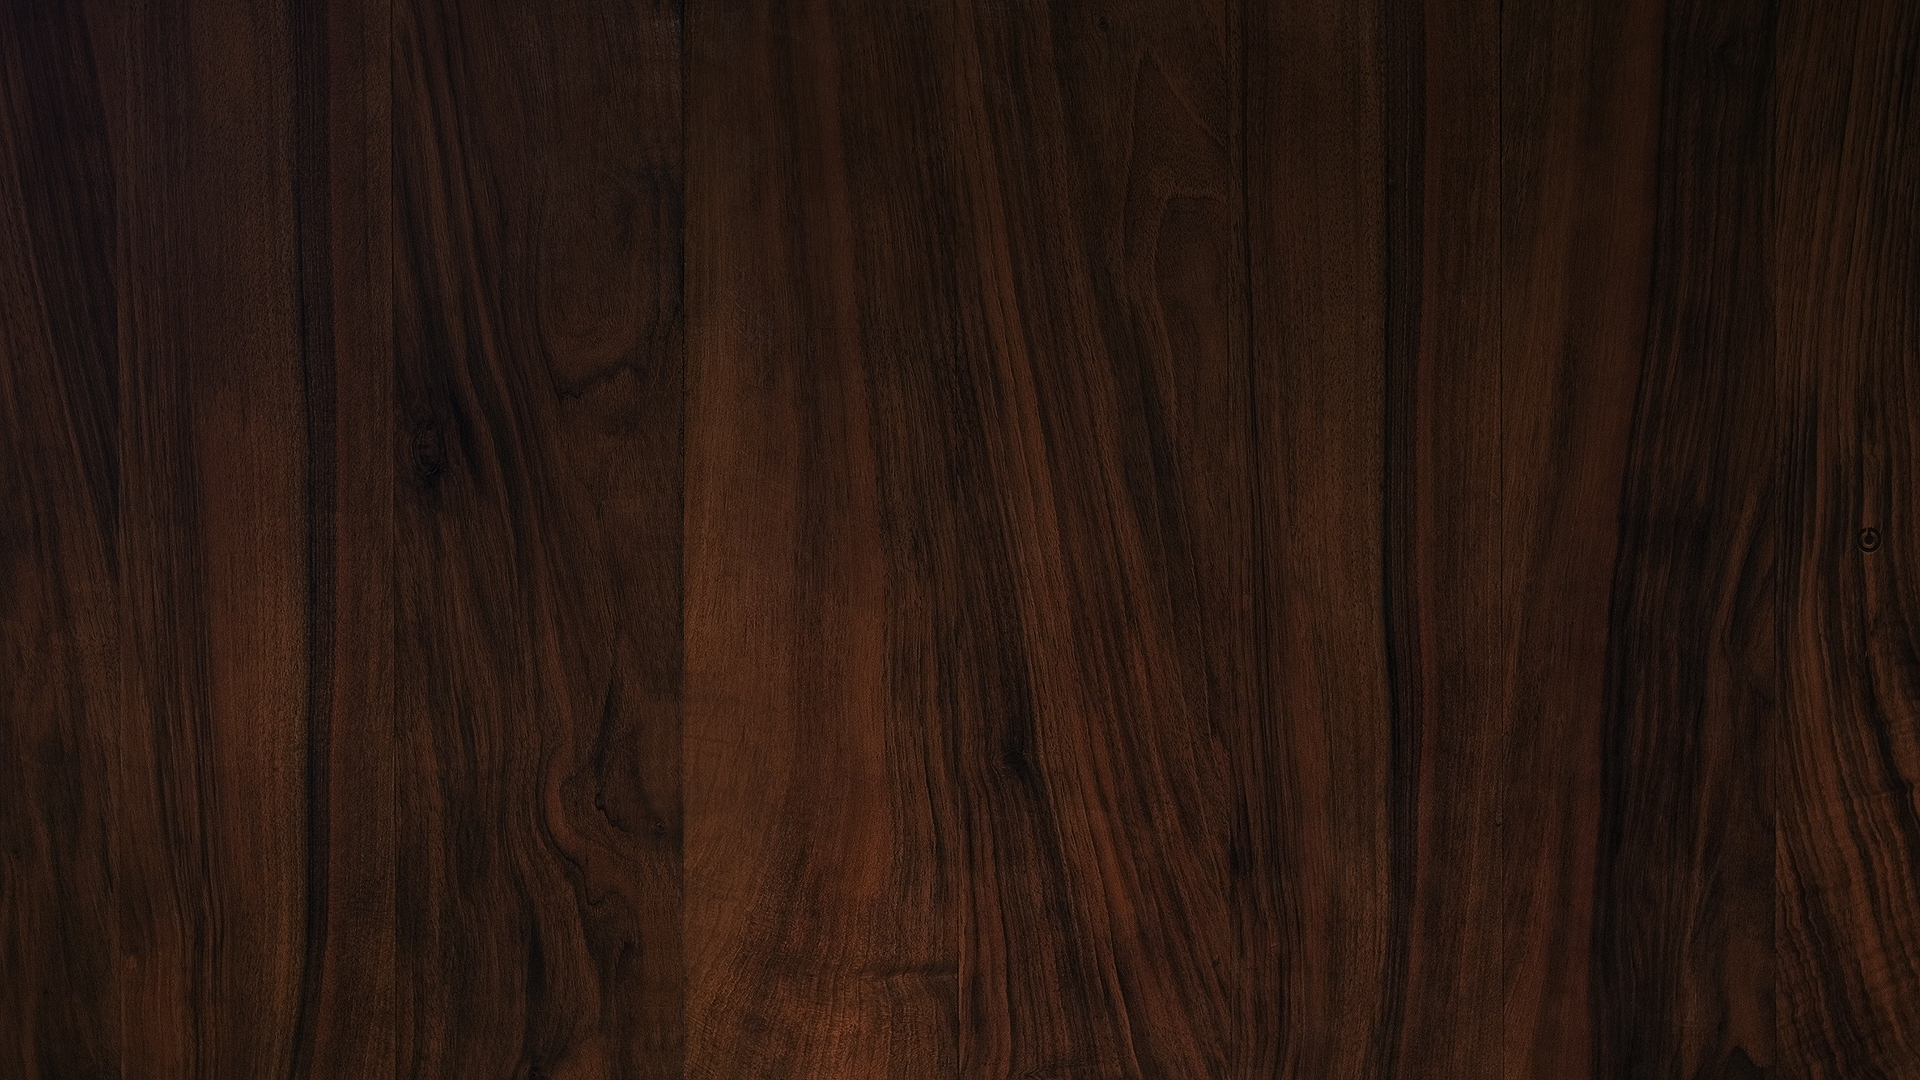 1920x1080 wood-wallpaper-elegant : Free Download, Borrow, and Streaming : Internet Archive